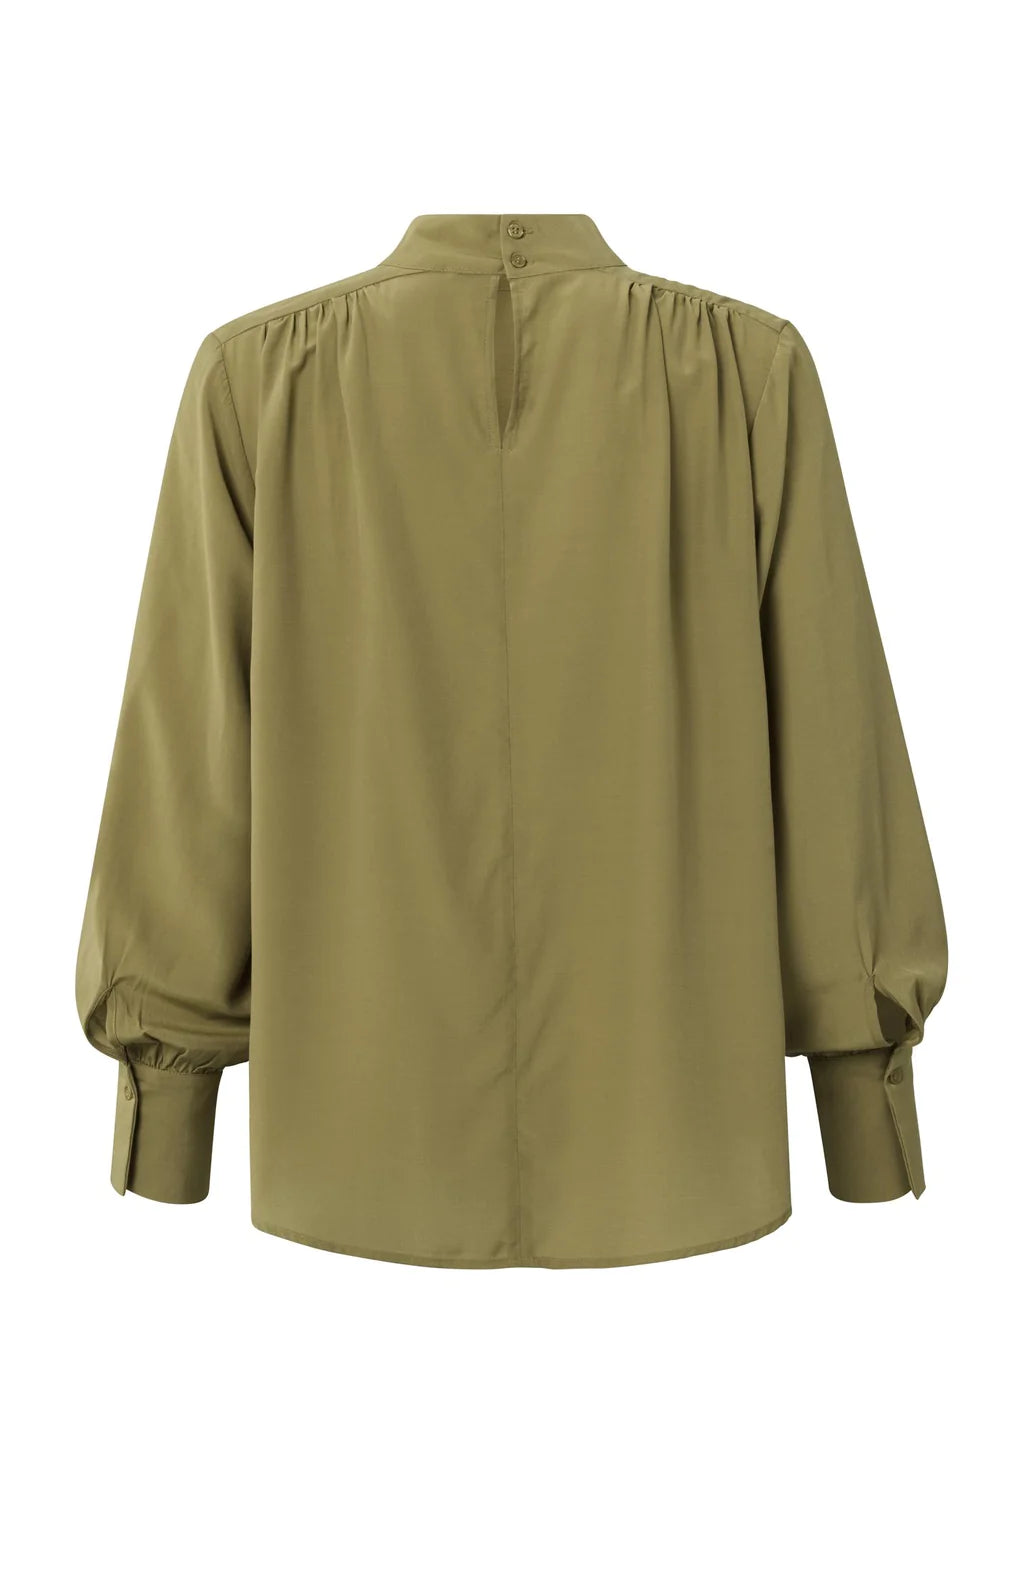 YaYa | Top with High Neck and Puffed Sleeves | Gathered Details | Gothic Olive Green